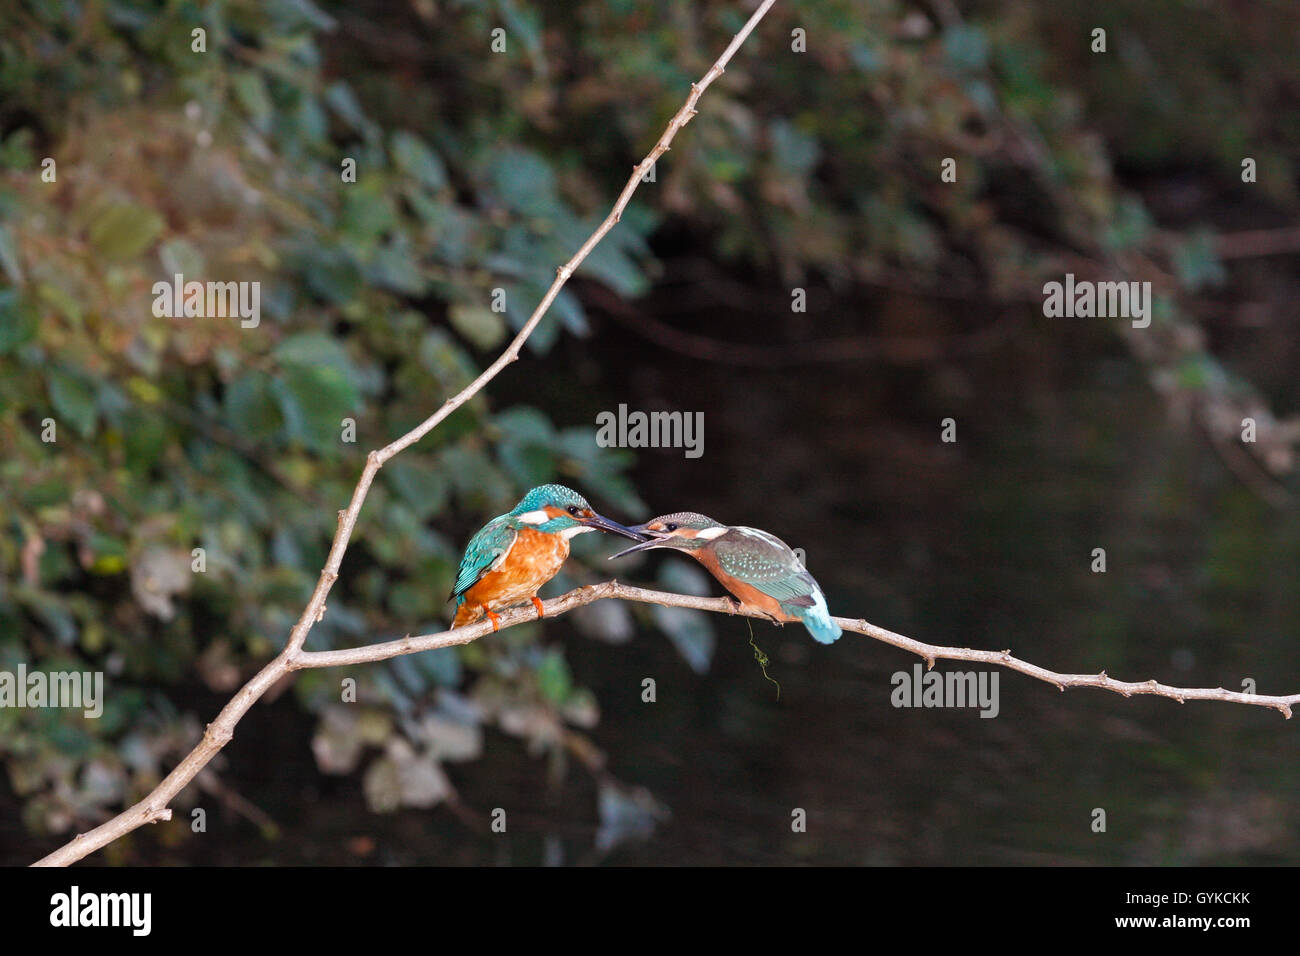 river kingfisher (Alcedo atthis), two kingfishers on a twig, Germany Stock Photo